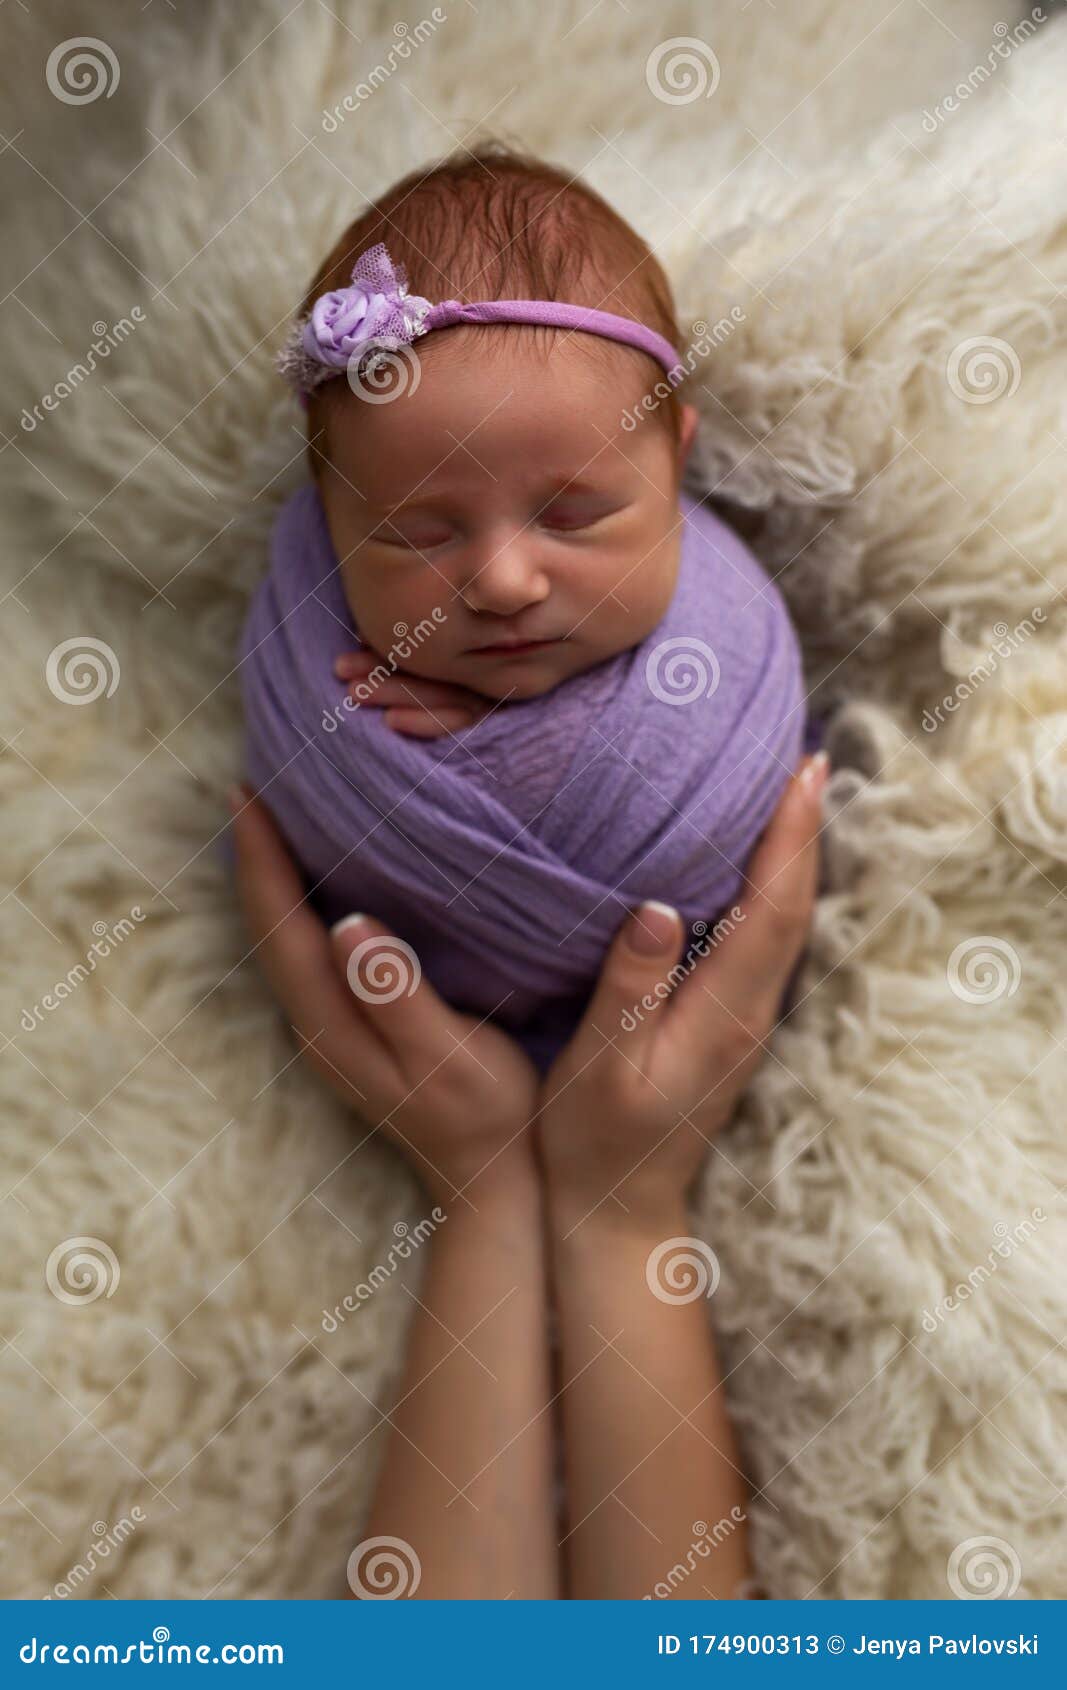 Funny names photographers give newborn poses | Canvas & Peach